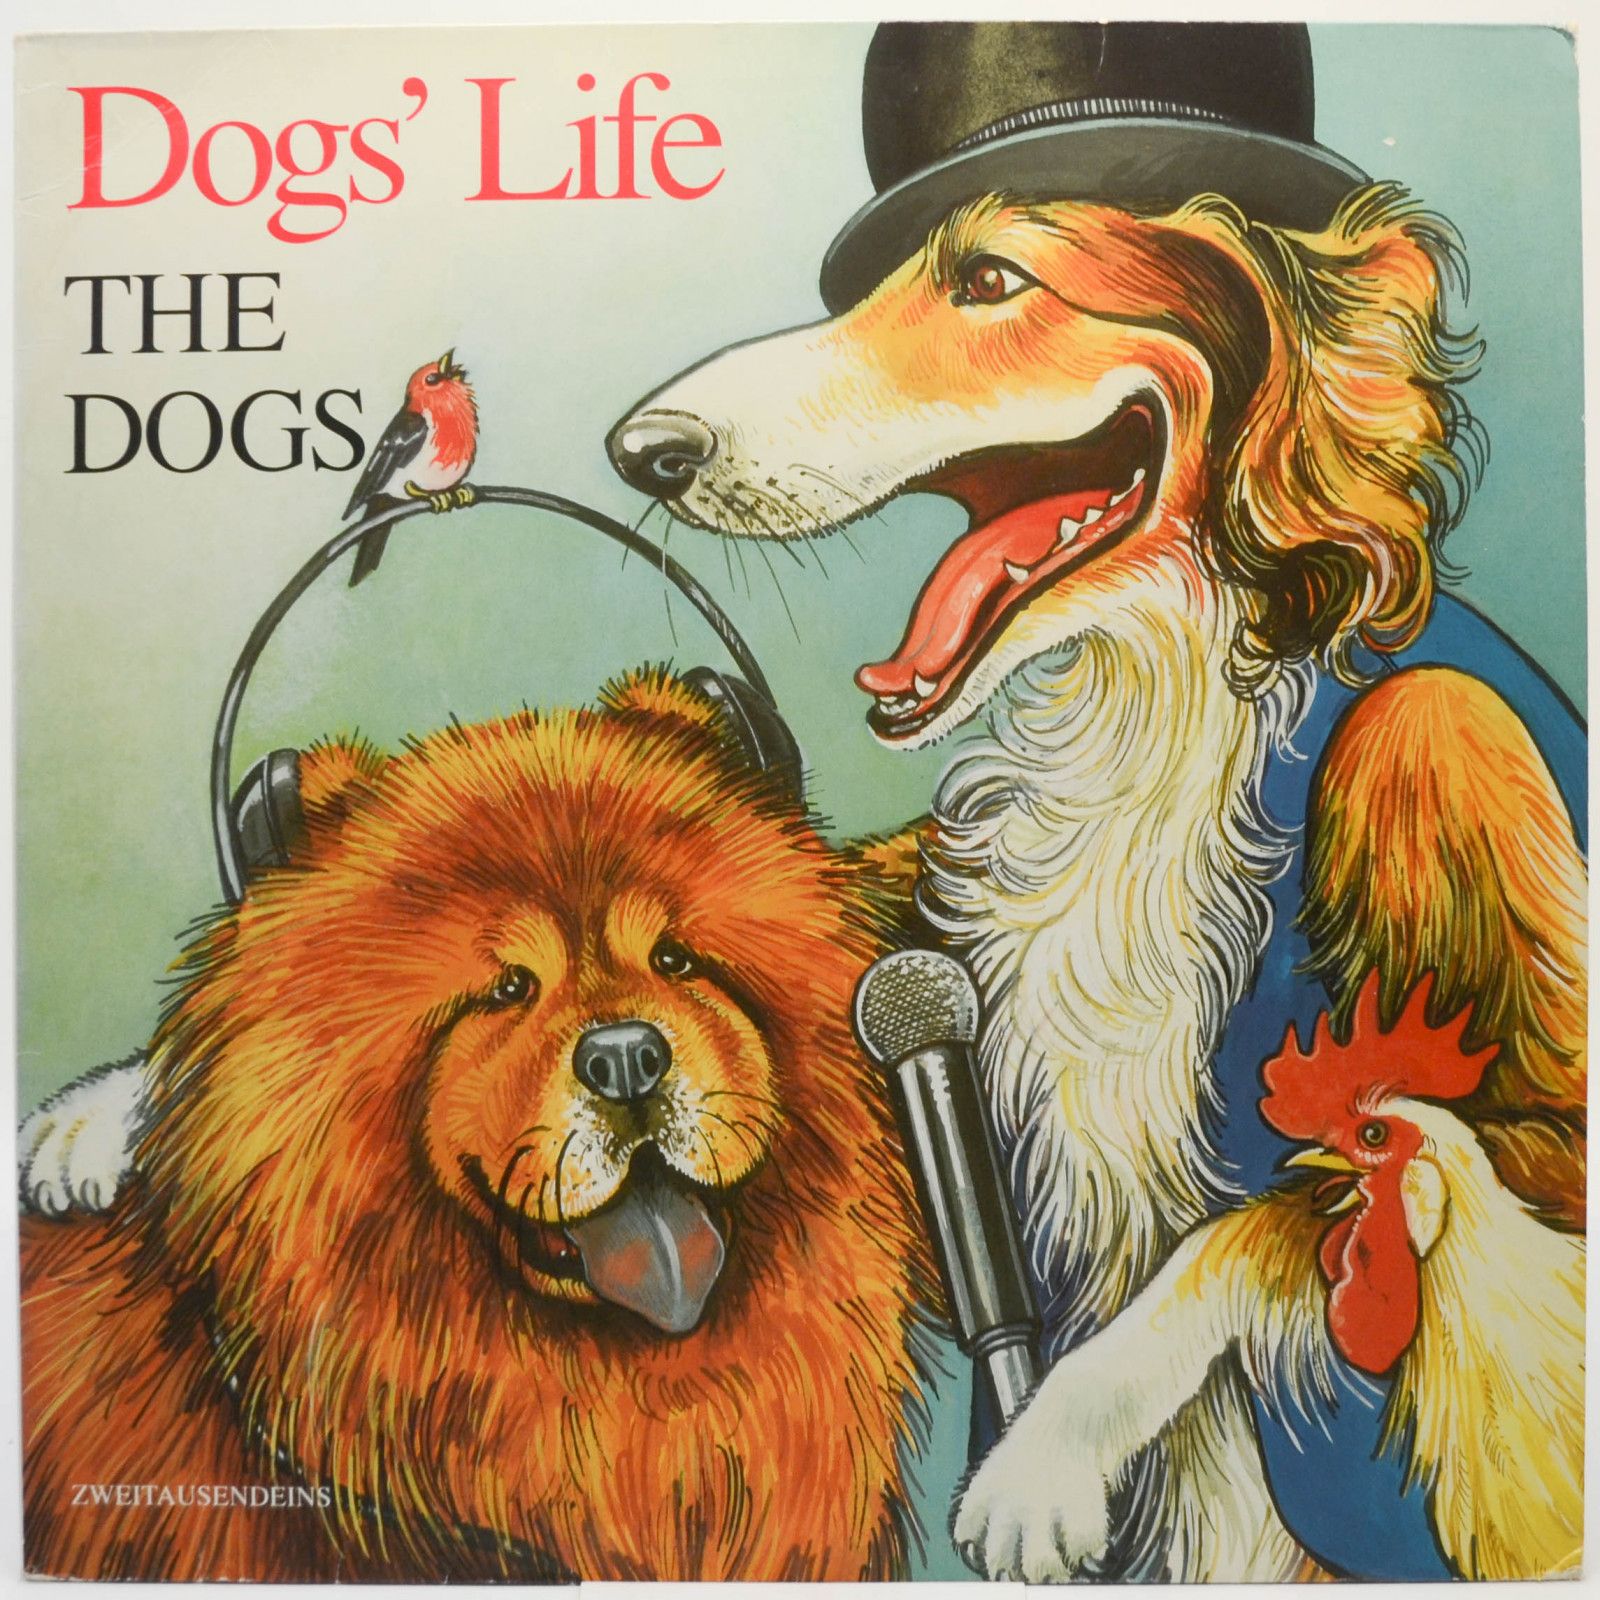 Dogs — Dogs' Life, 1990